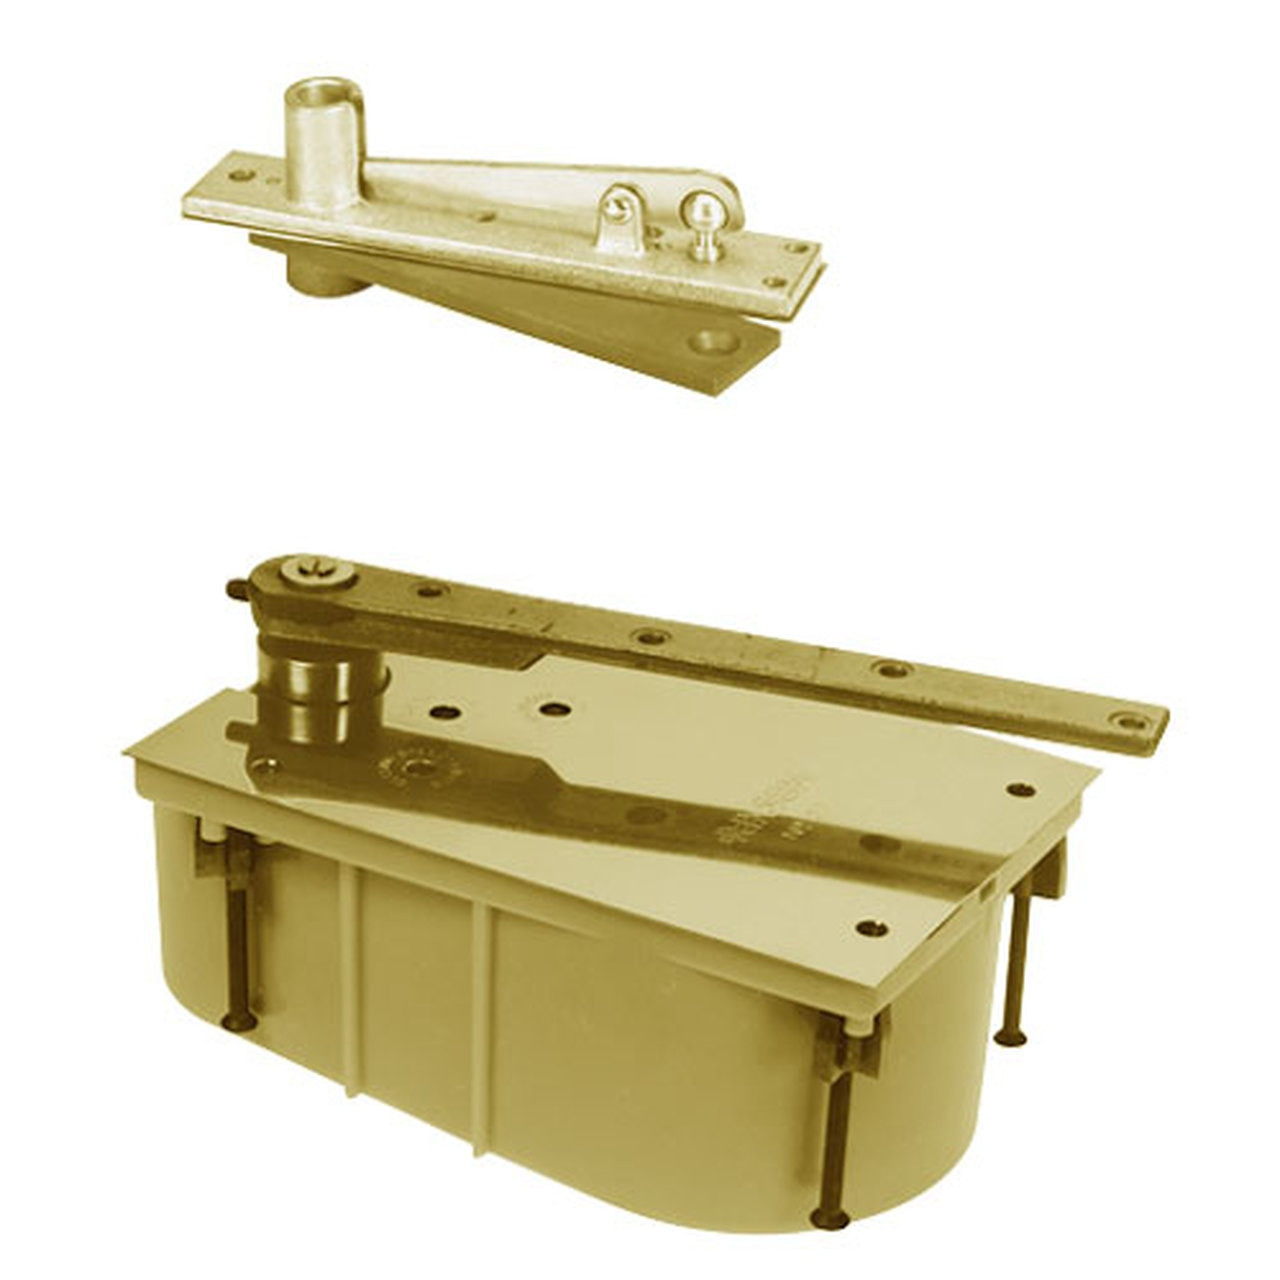 28-90N-554-LCC-LH-606 Rixson 28 Series Heavy Duty Single Acting Center Hung Floor Closer with Concealed Arm in Satin Brass Finish